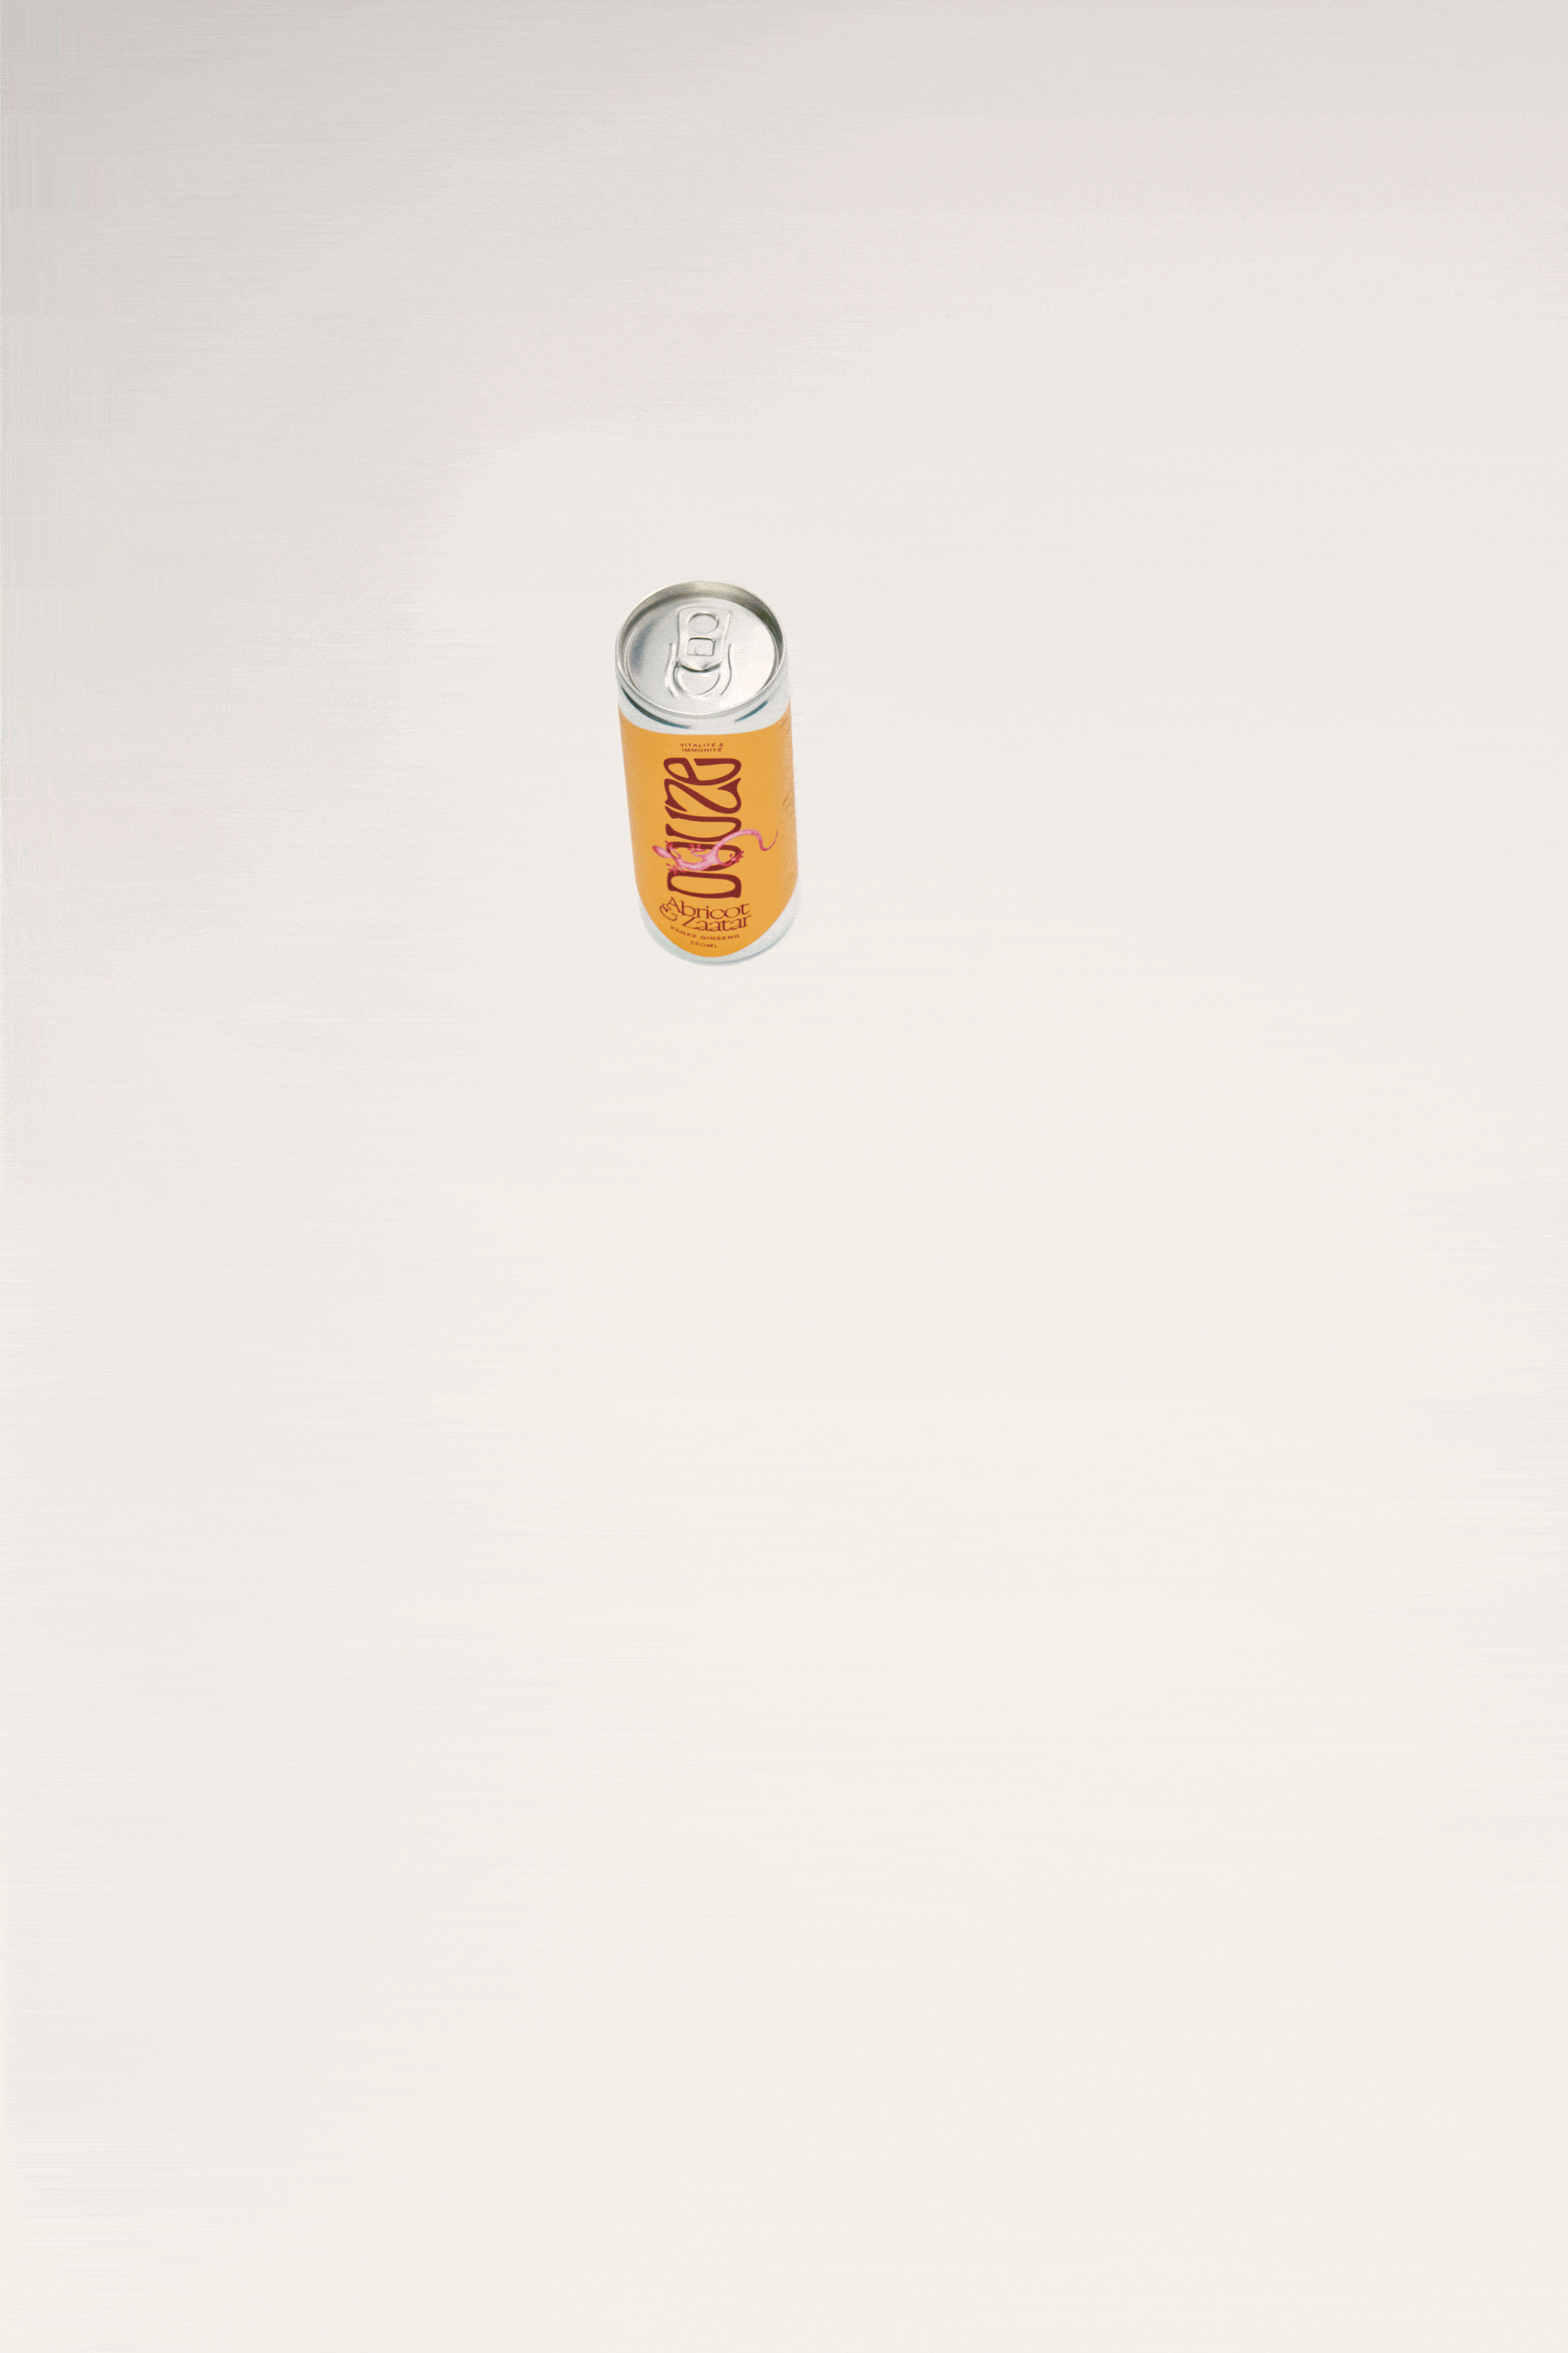 Gif of Douze cans and cocktails appearing and disappearing